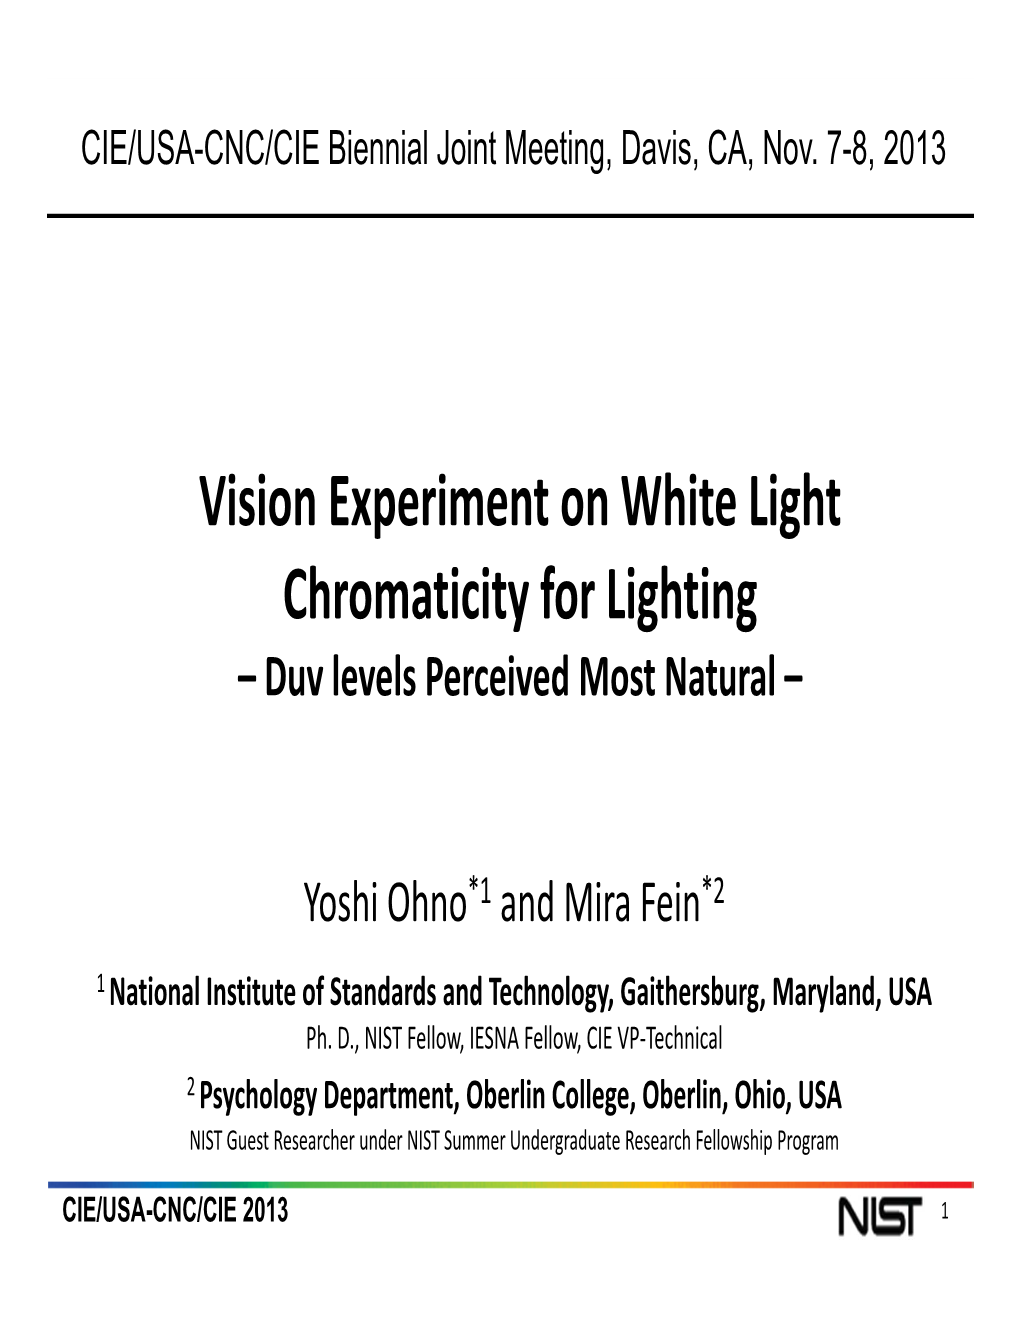 Vision Experiment on White Light Chromaticity for Lighting –Duv Levels Perceived Most Natural –